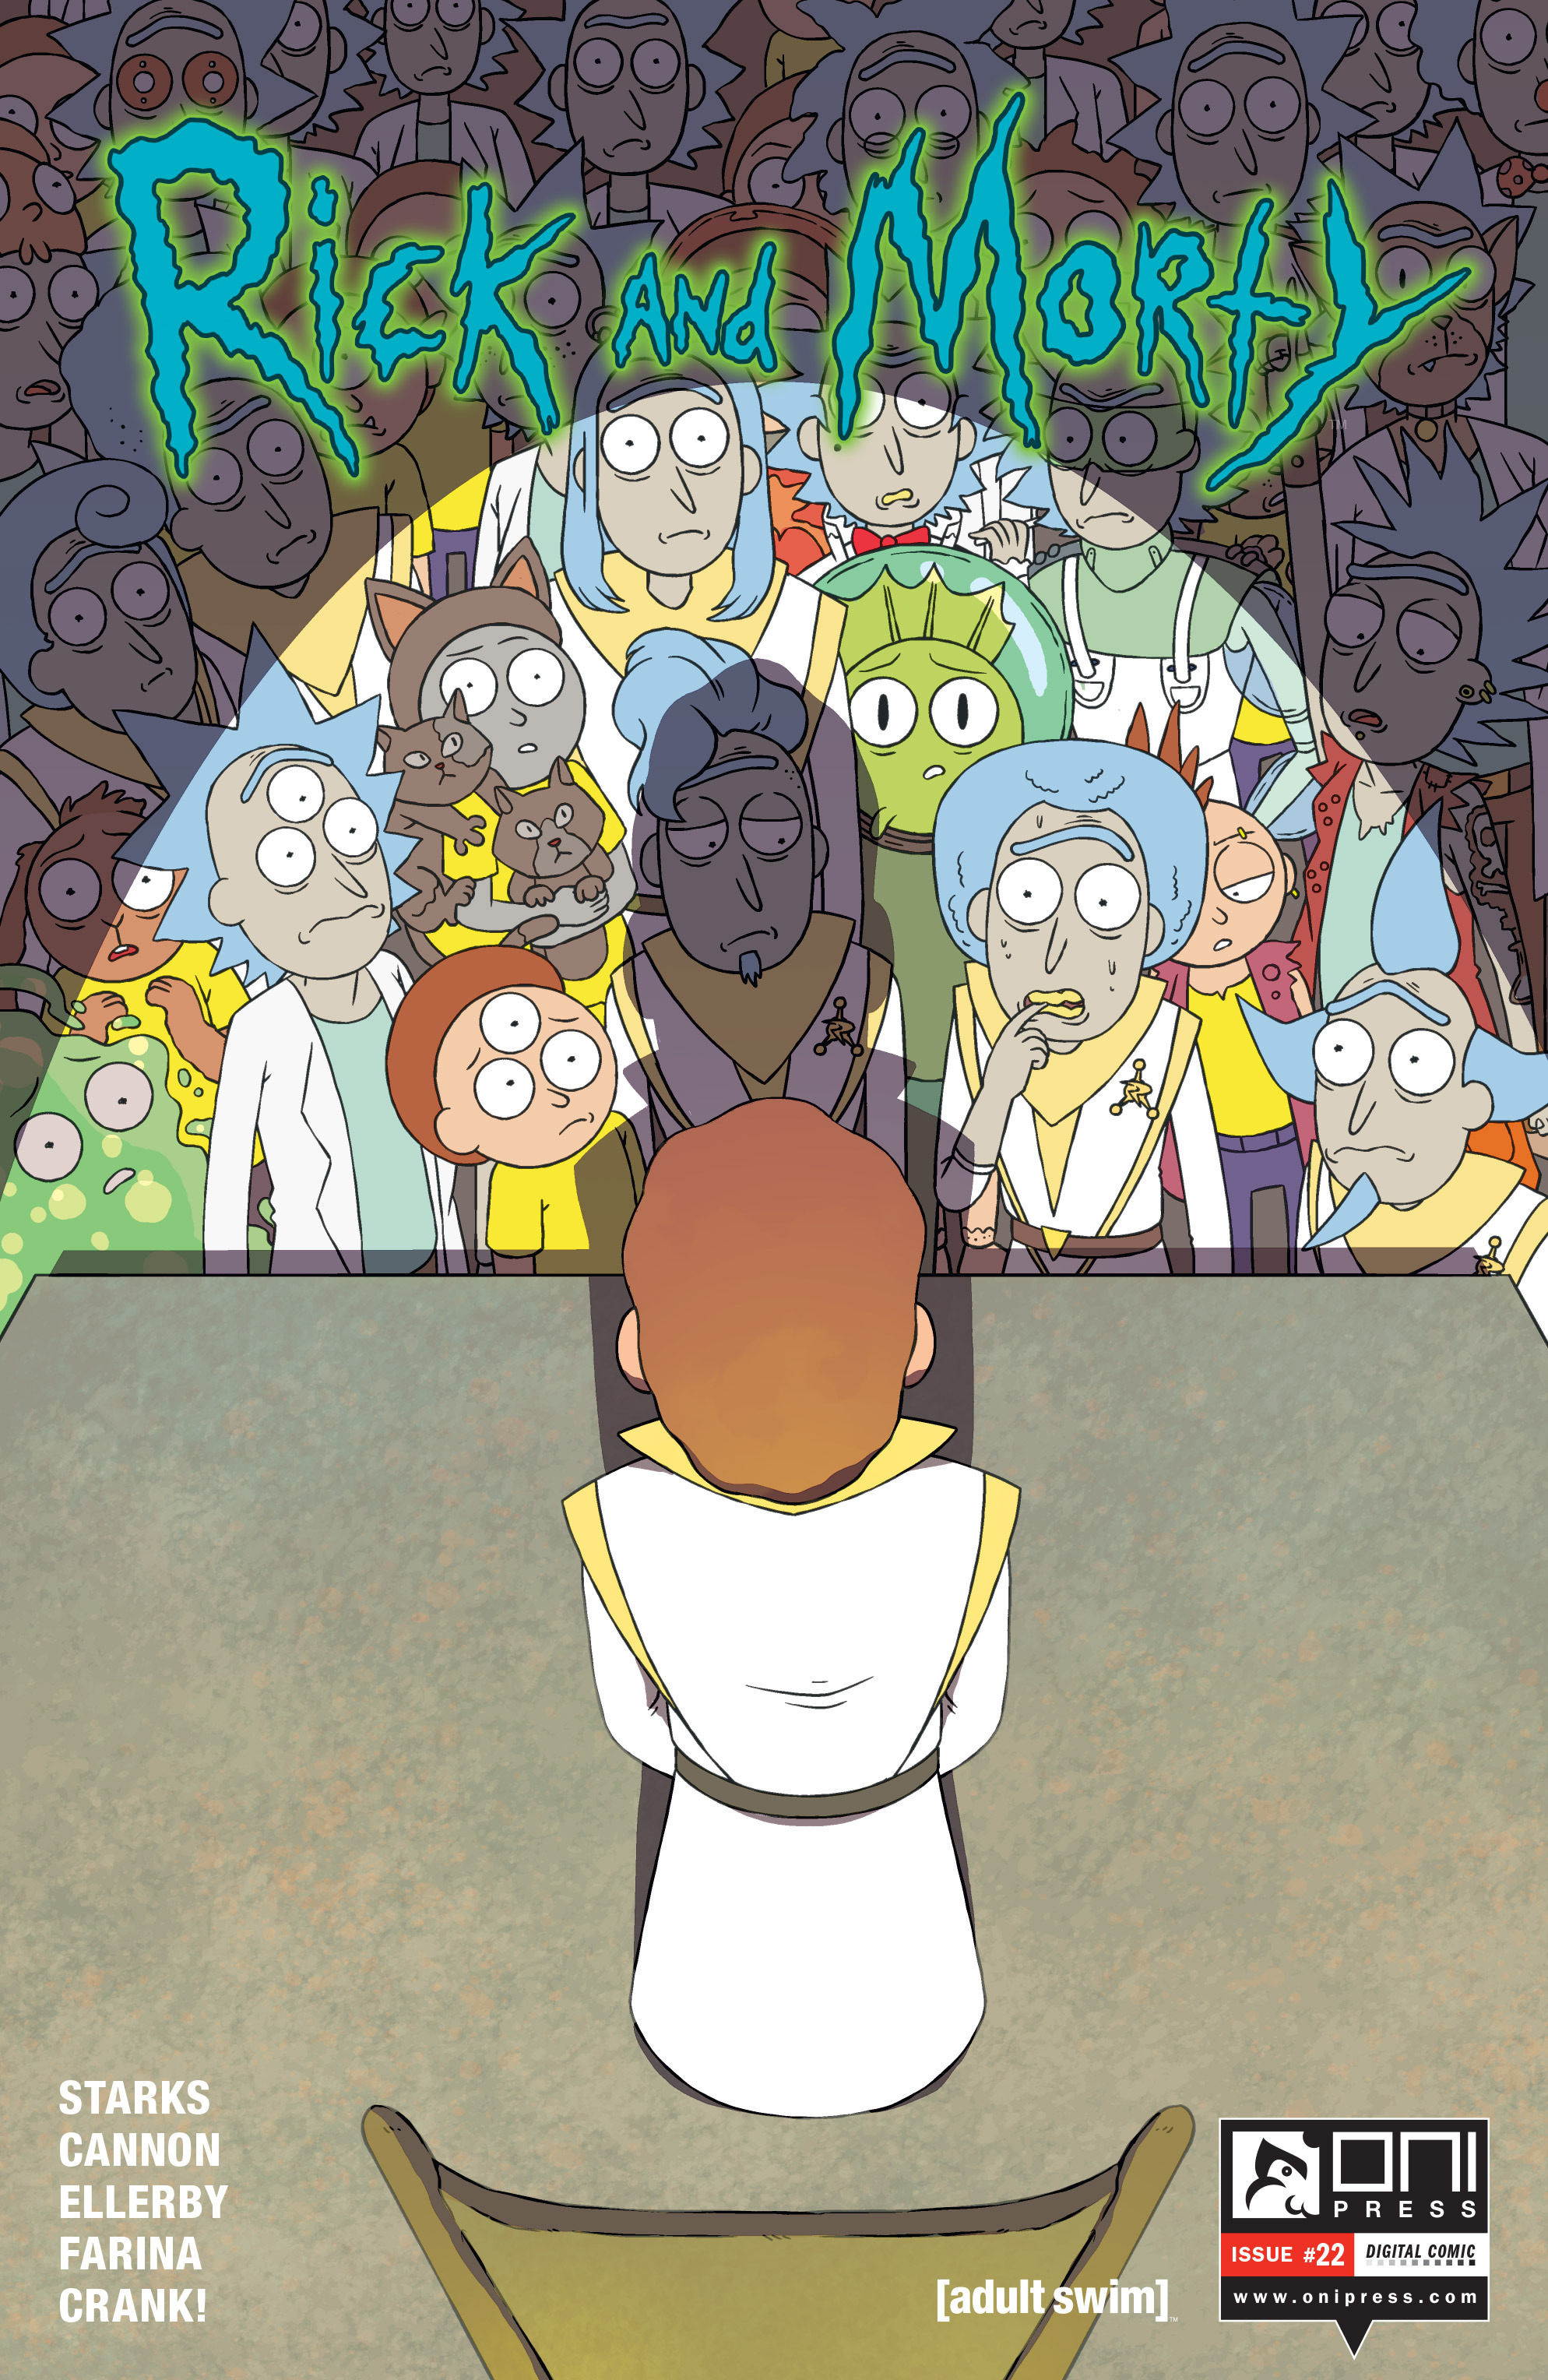 Read online Rick and Morty comic -  Issue #22 - 1